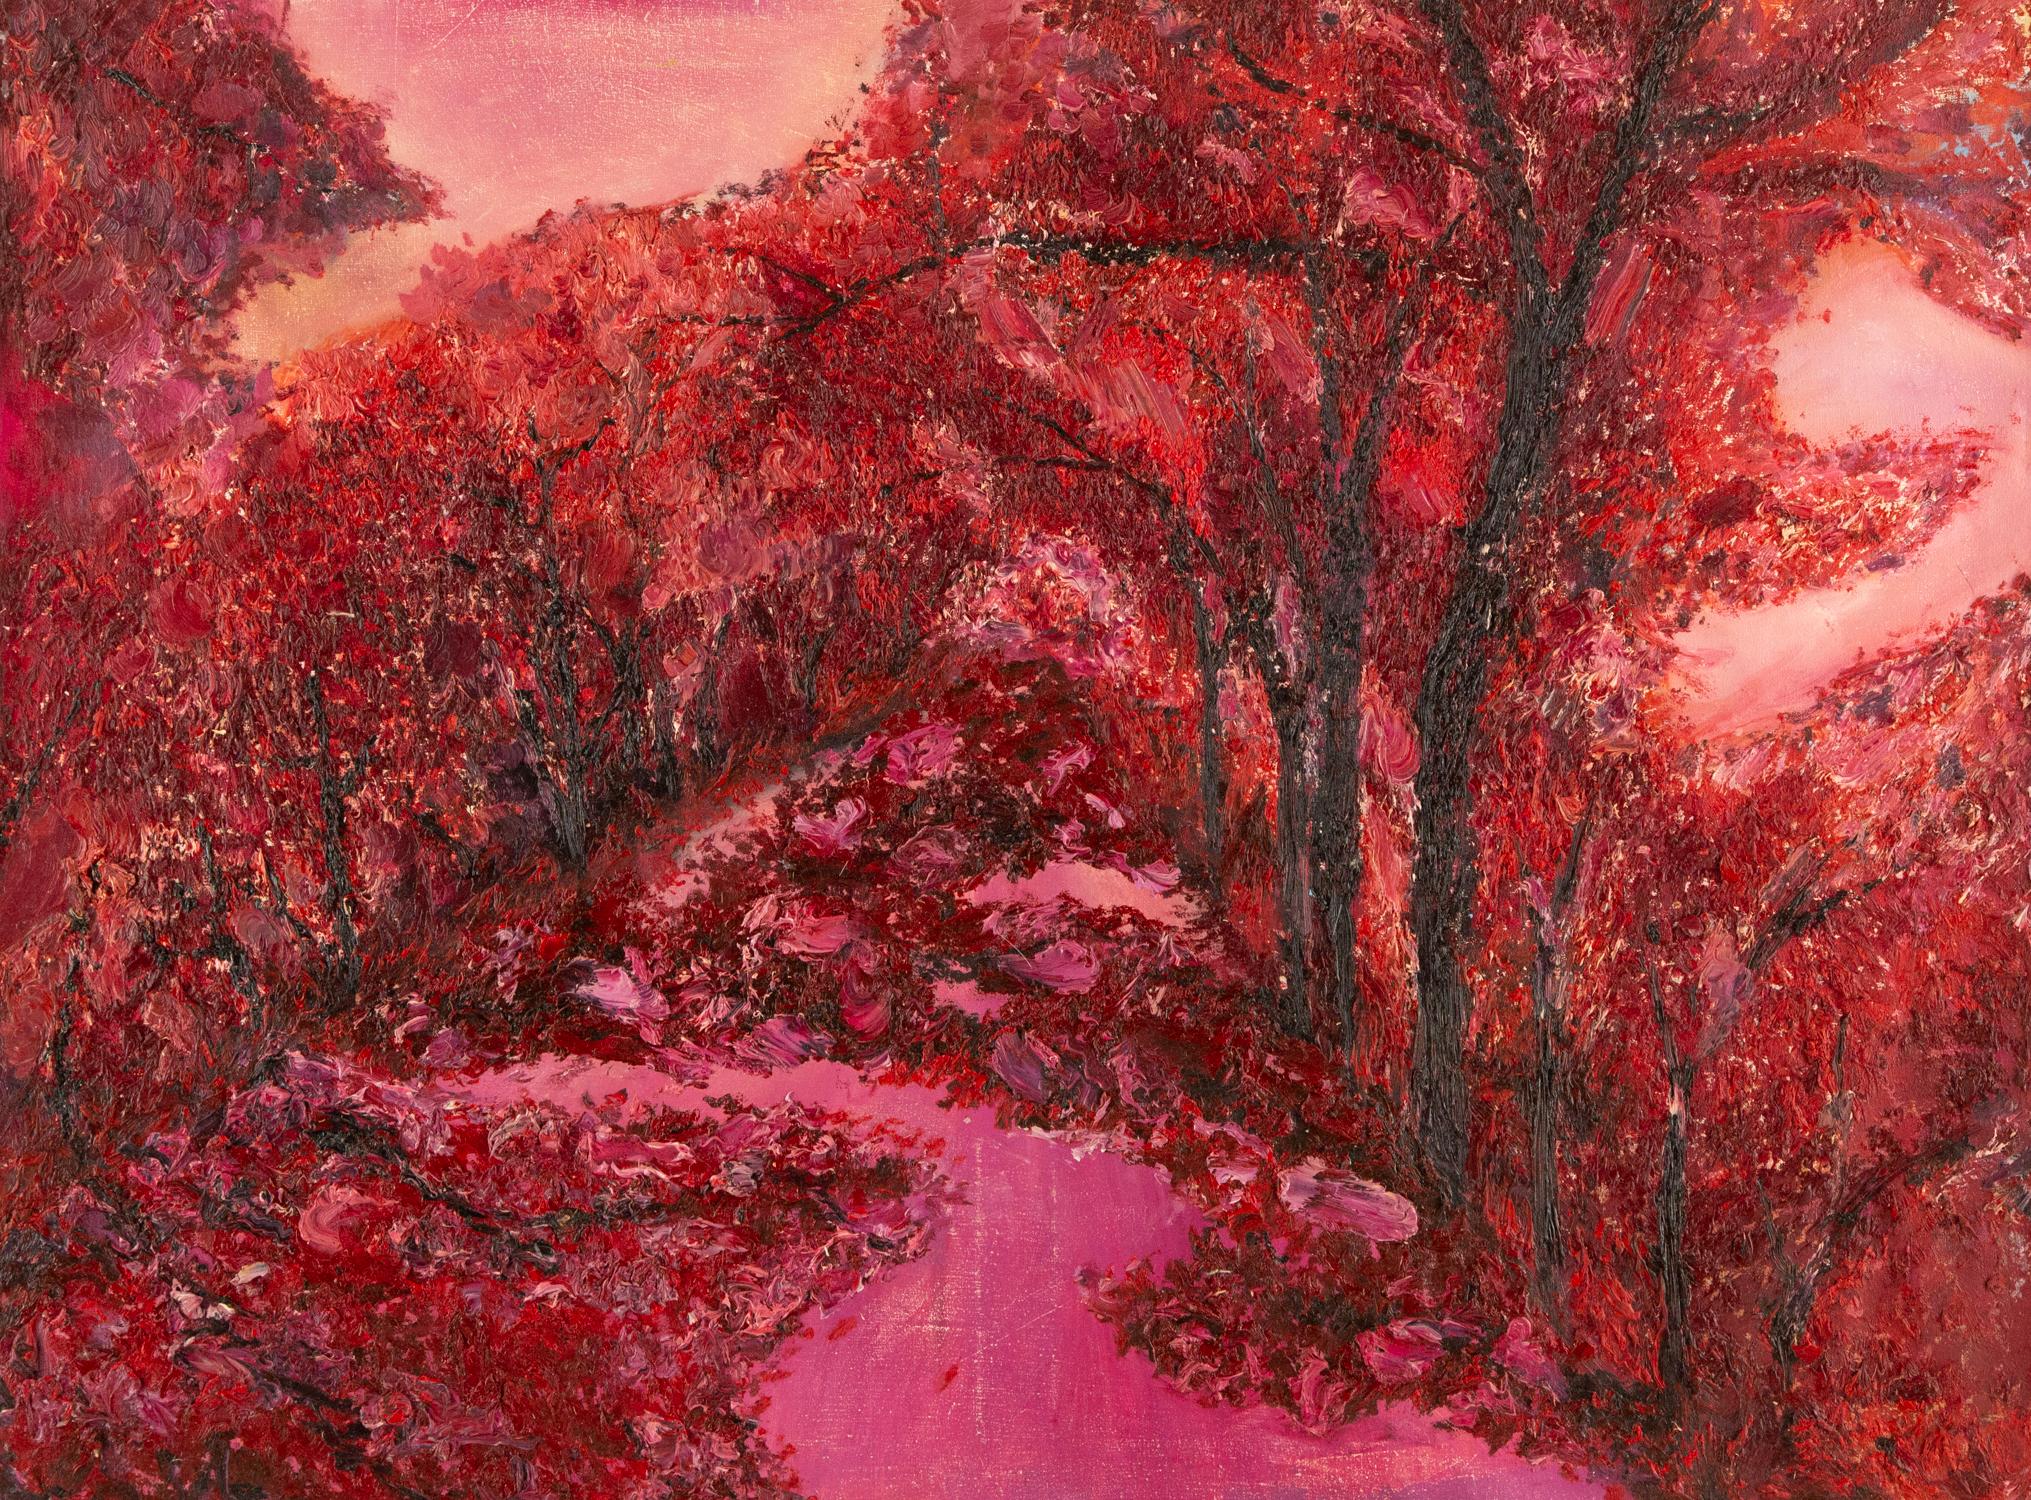 Title: The Red Forest
Medium: Oil on canvas
Size: 23.5 x 31 inches
Frame: Framing options available!
Condition: The painting appears to be in excellent condition.
Note: This painting is unstretched
Year: 2000 Circa
Artist: Ning Guoqiang
Signature: